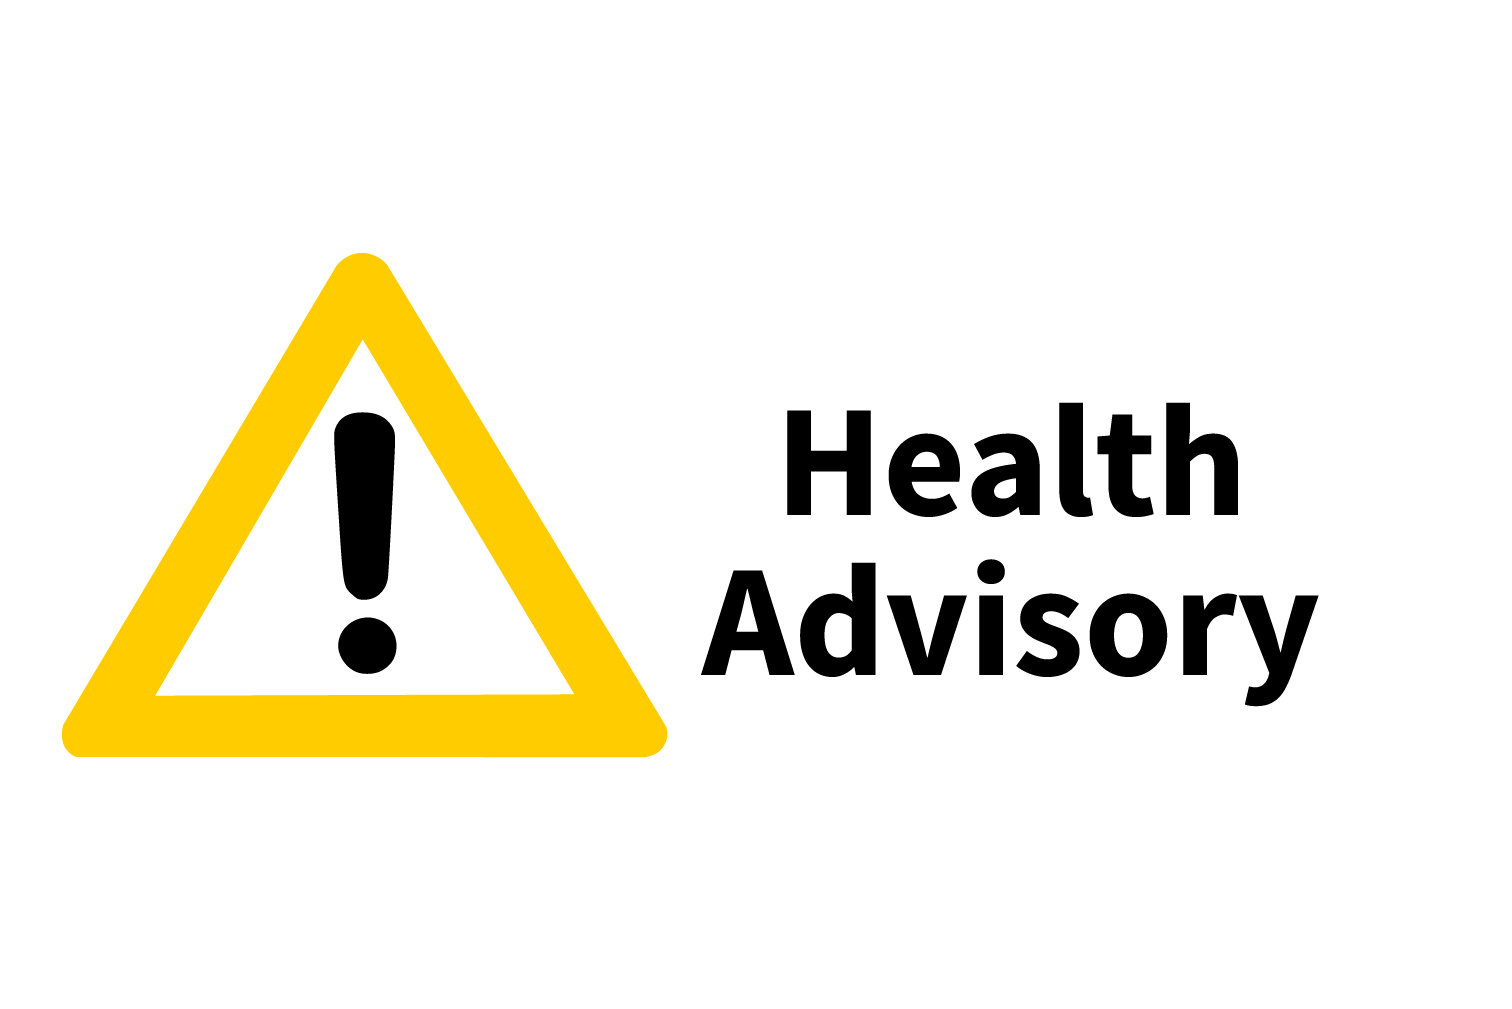 Yellow triangle with ! in the center and "Health Advisory" in black text to the right.